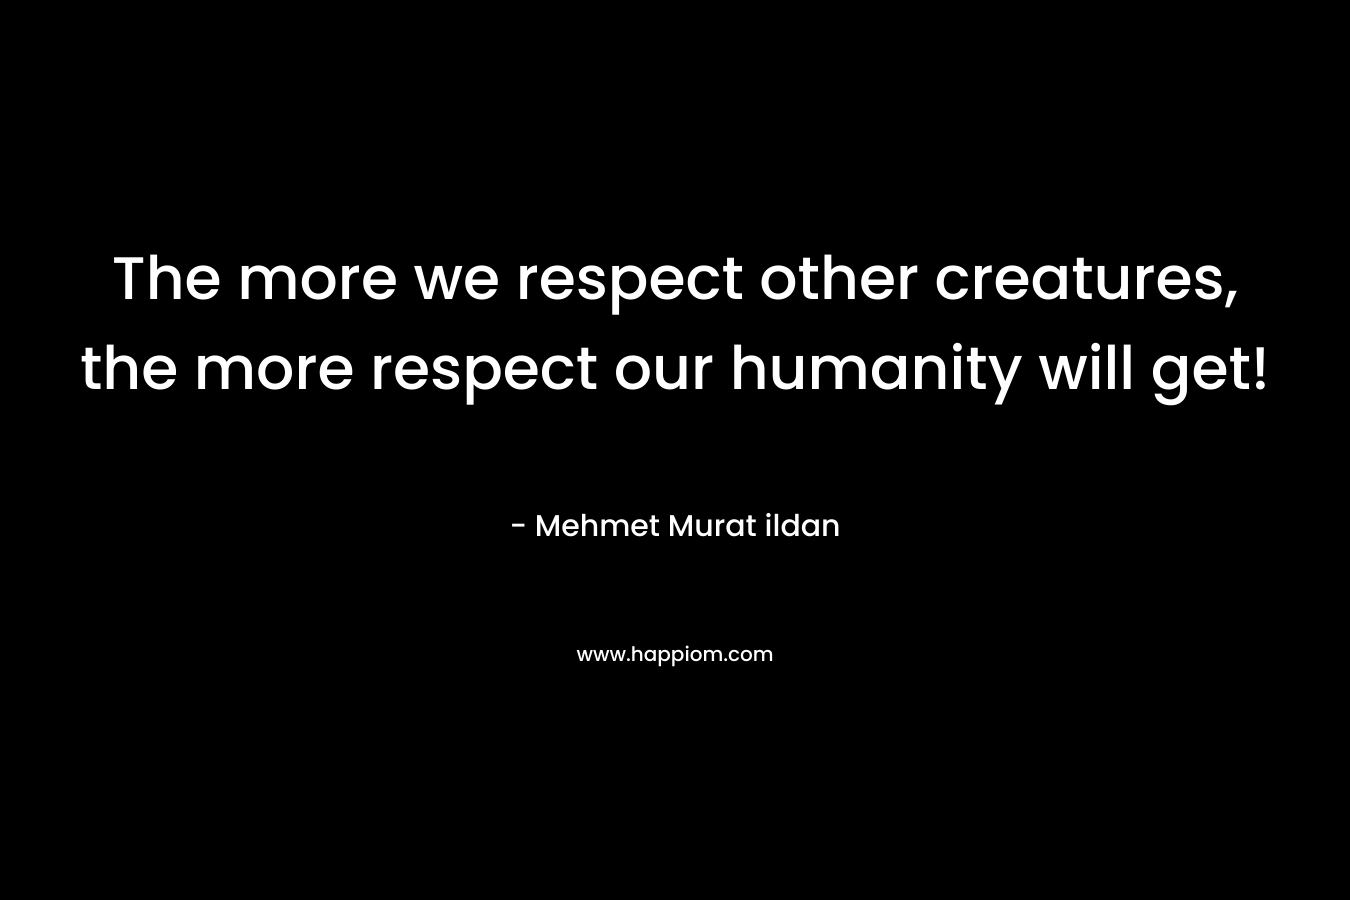 The more we respect other creatures, the more respect our humanity will get!